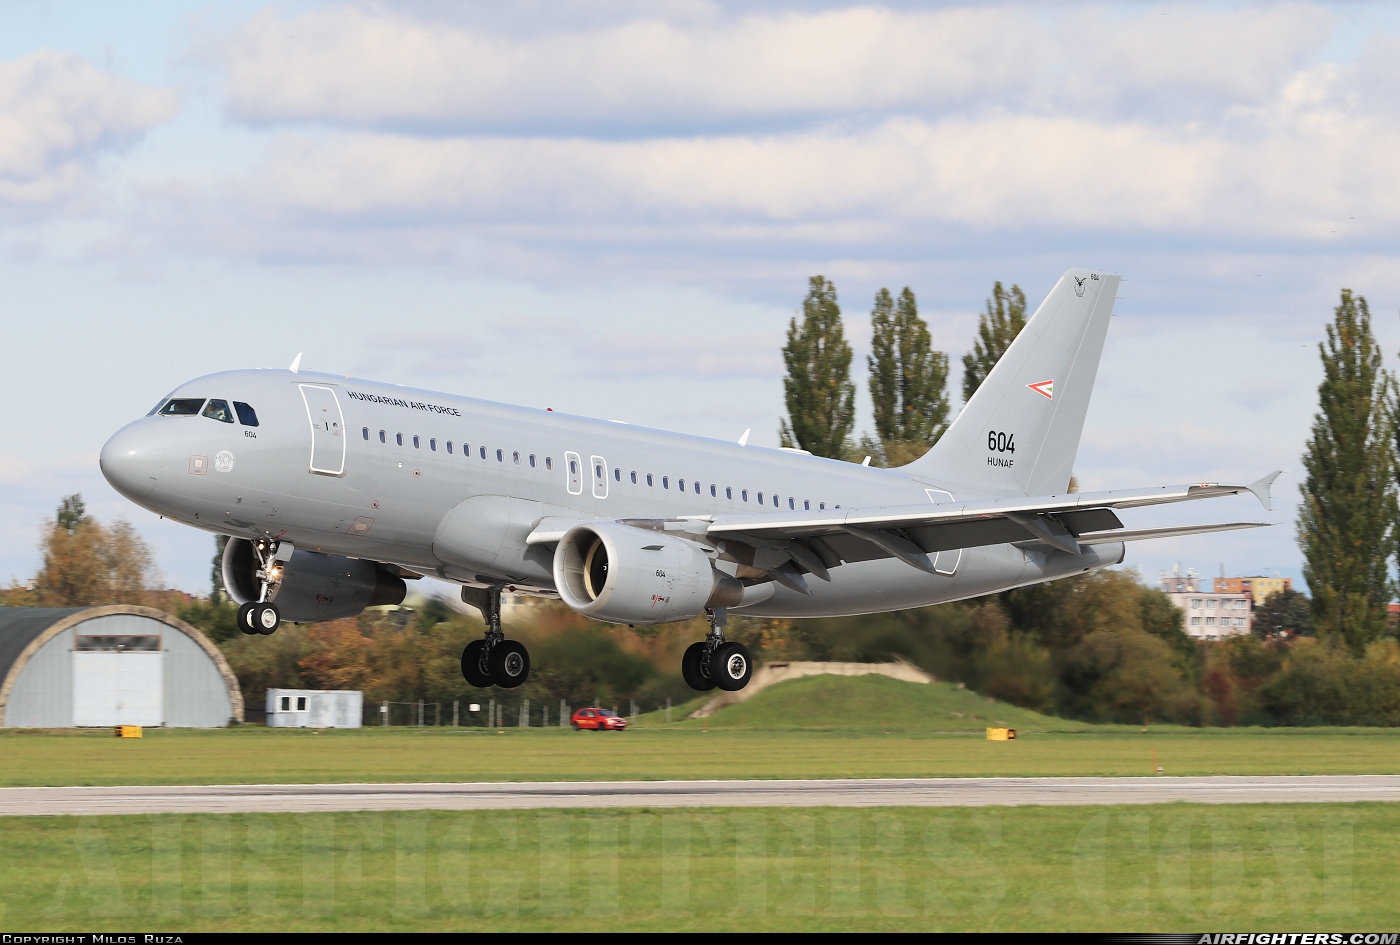 Hungary - Air Force Airbus A319-112 604 at Pardubice (PED / LKPD), Czech Republic